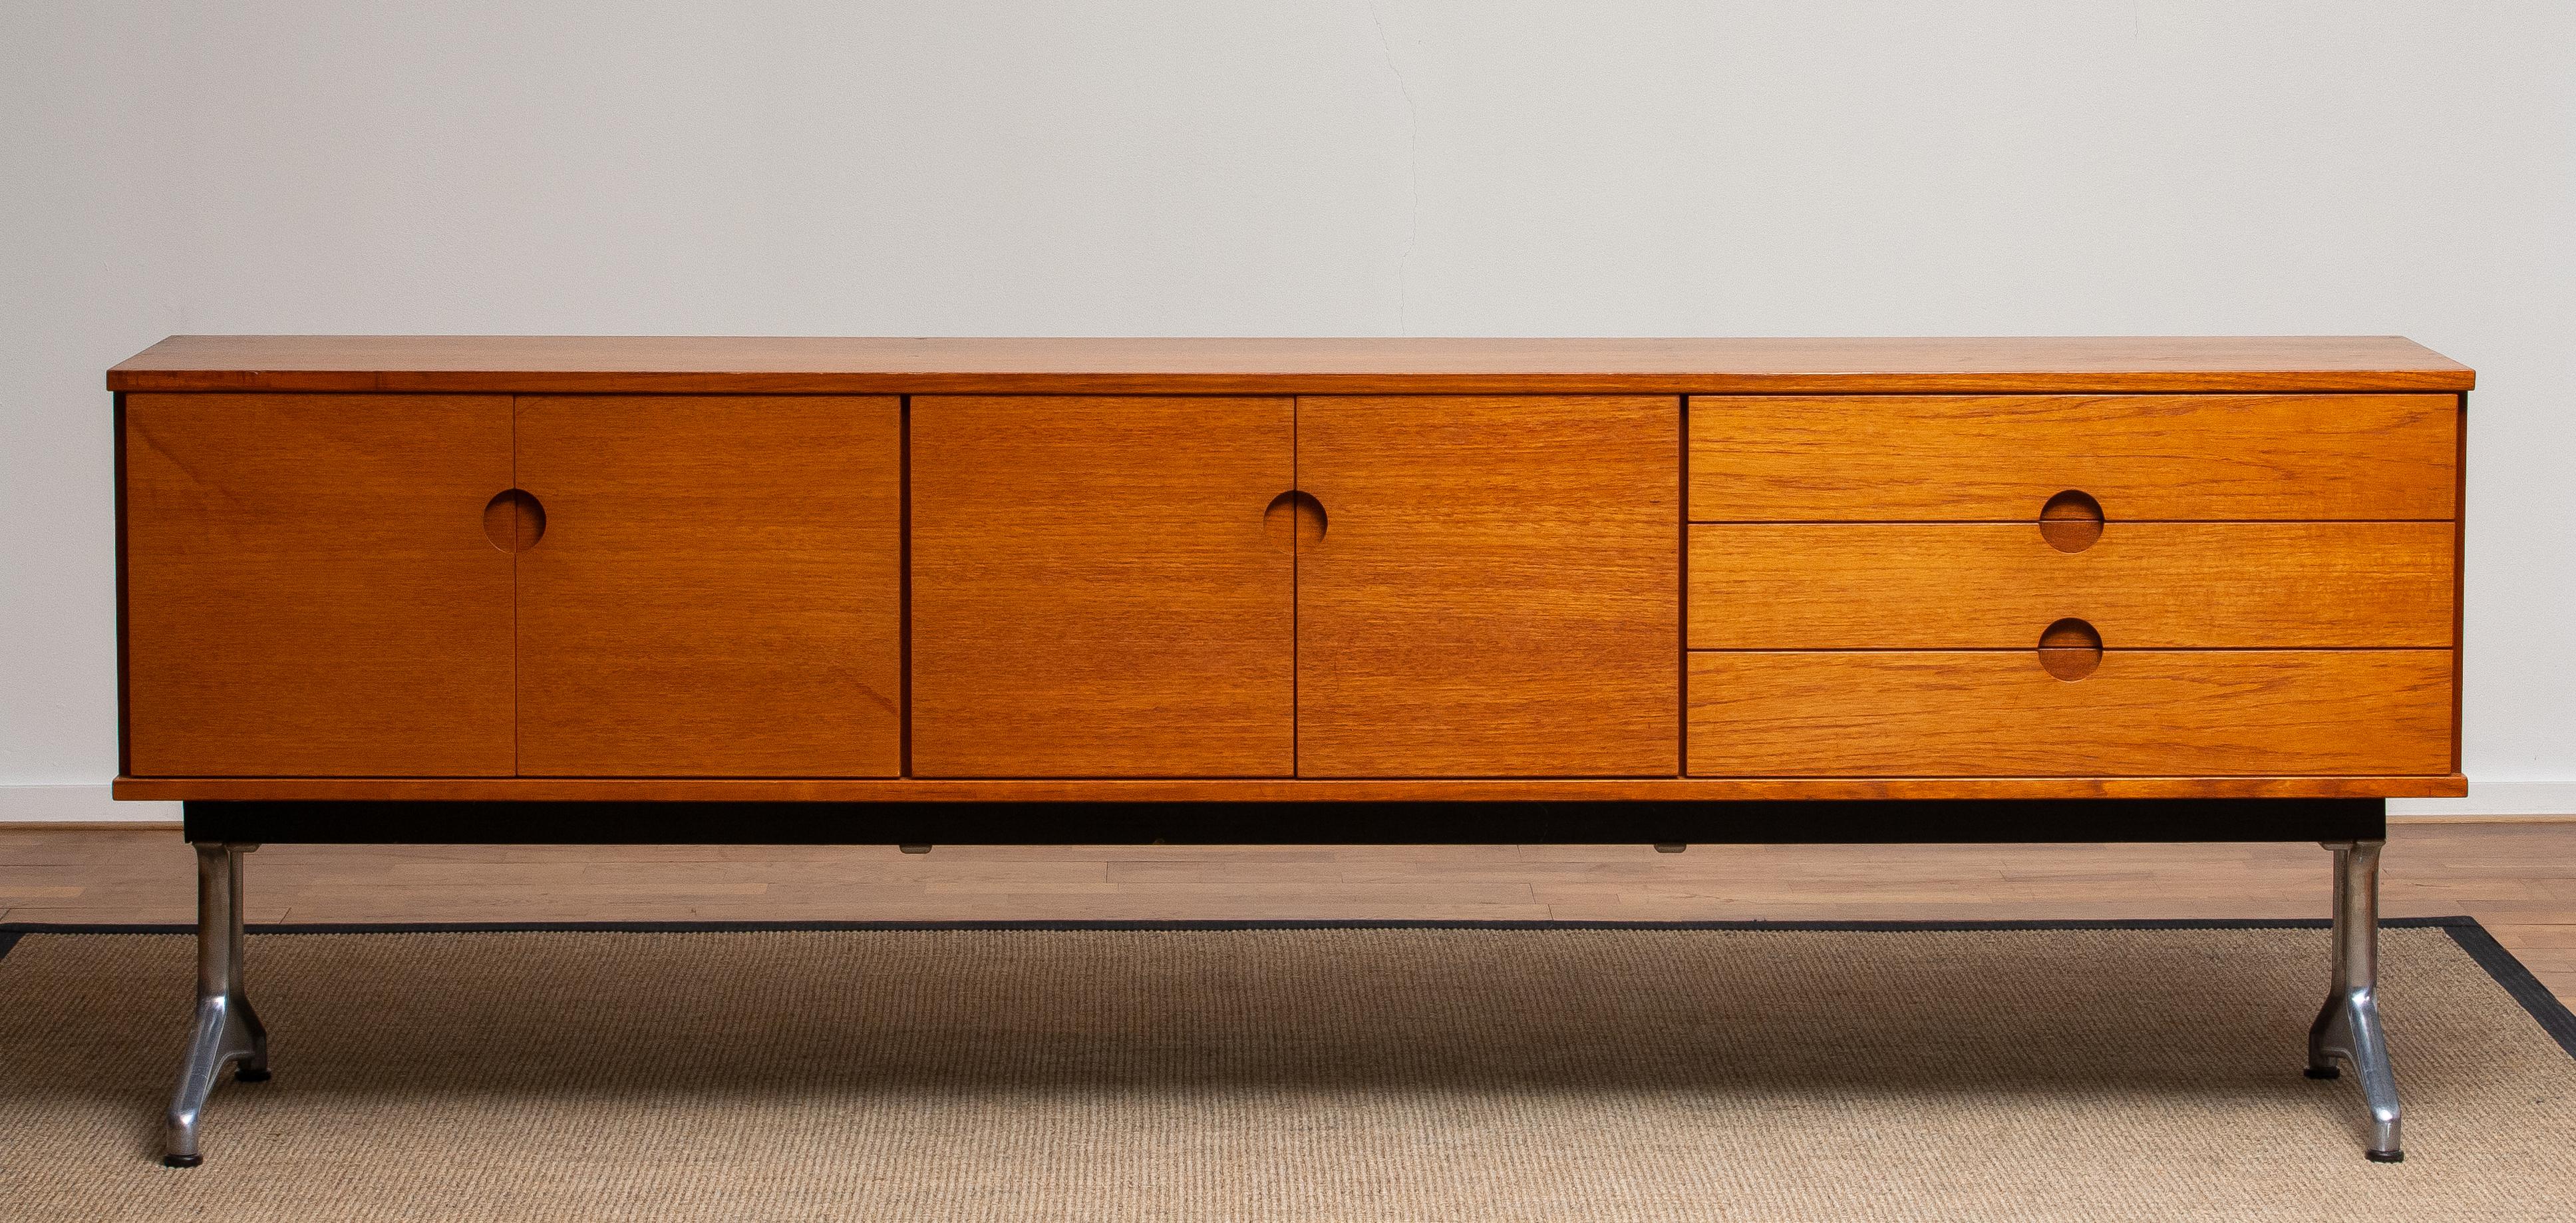 1960s Sideboard / Credenzas in Teak on a Aluminum Stand by Pertti Salmi, Norway 8